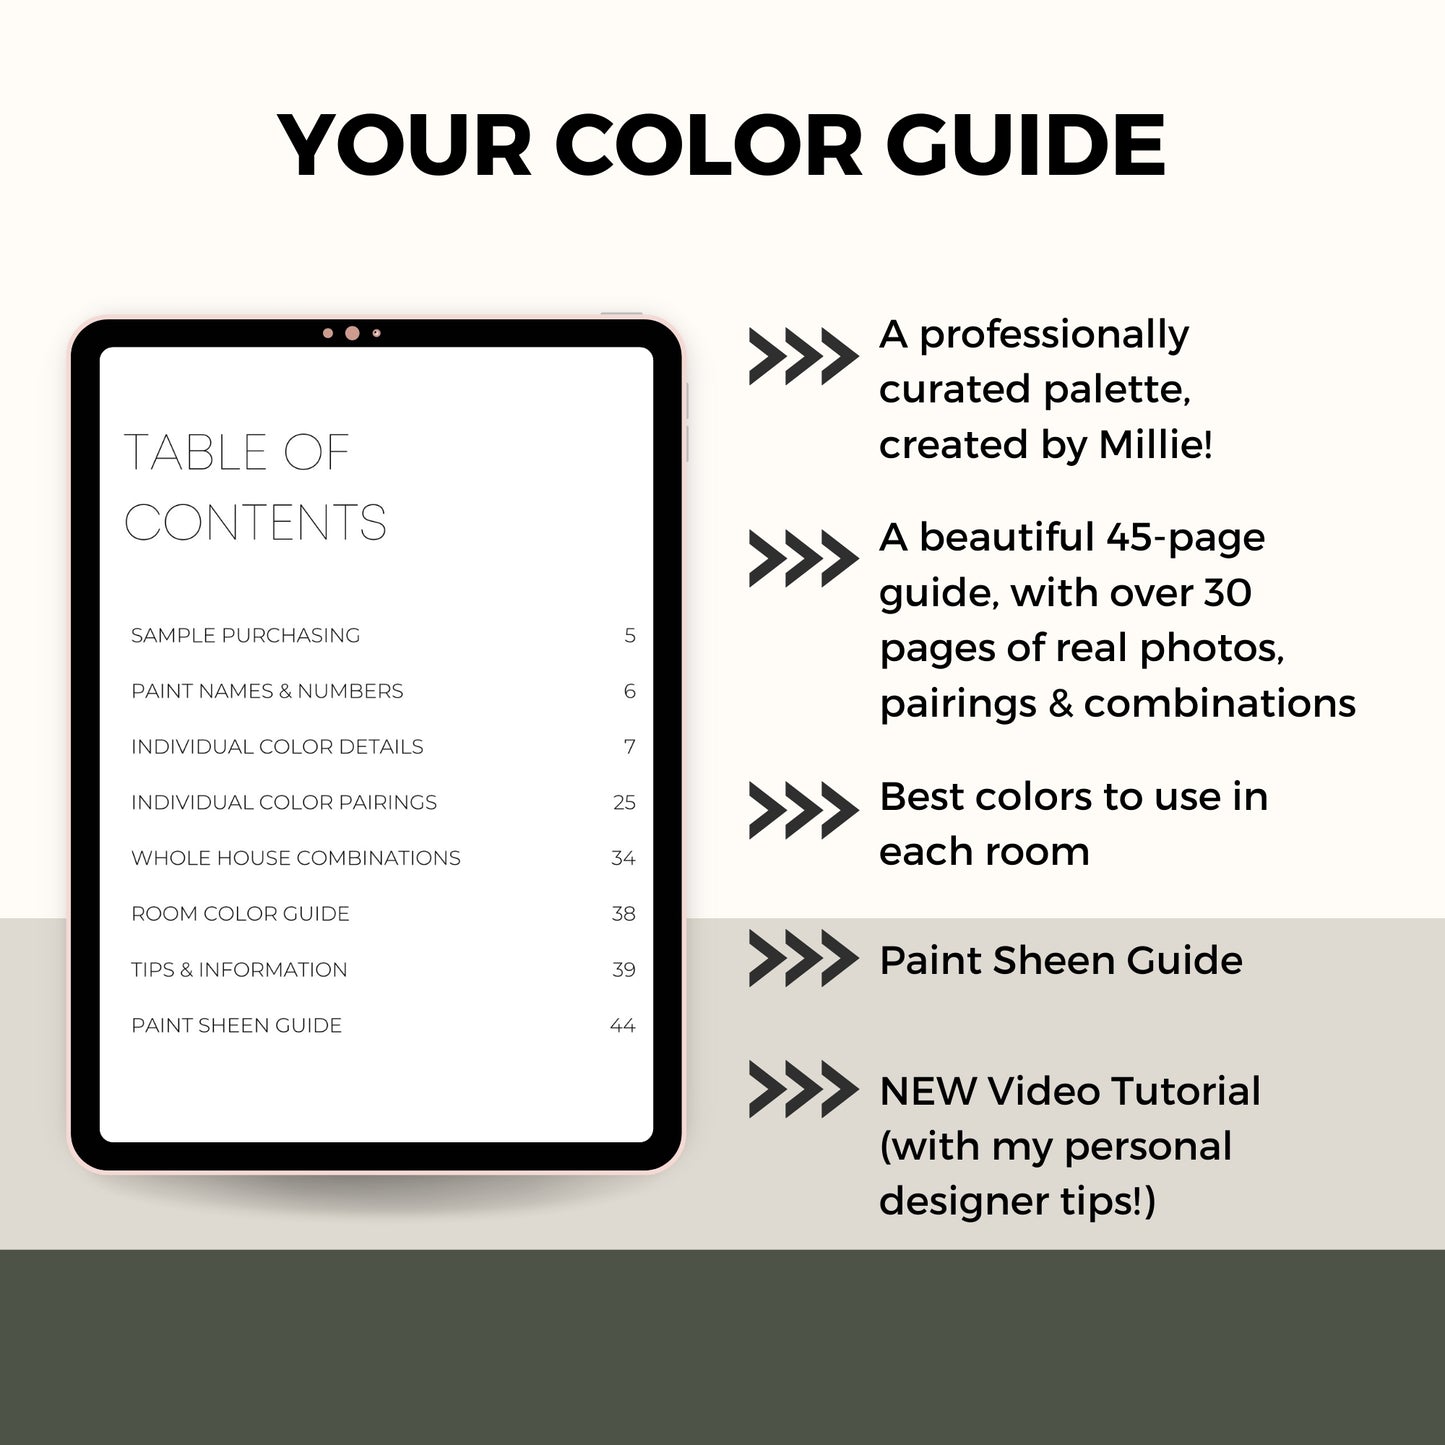 Anew Gray Sherwin Williams Paint Palette - Modern Neutral Interior Paint Colors for Home - Coordinating Interior Design Color Palette, Sherwin Williams Drift of Mist